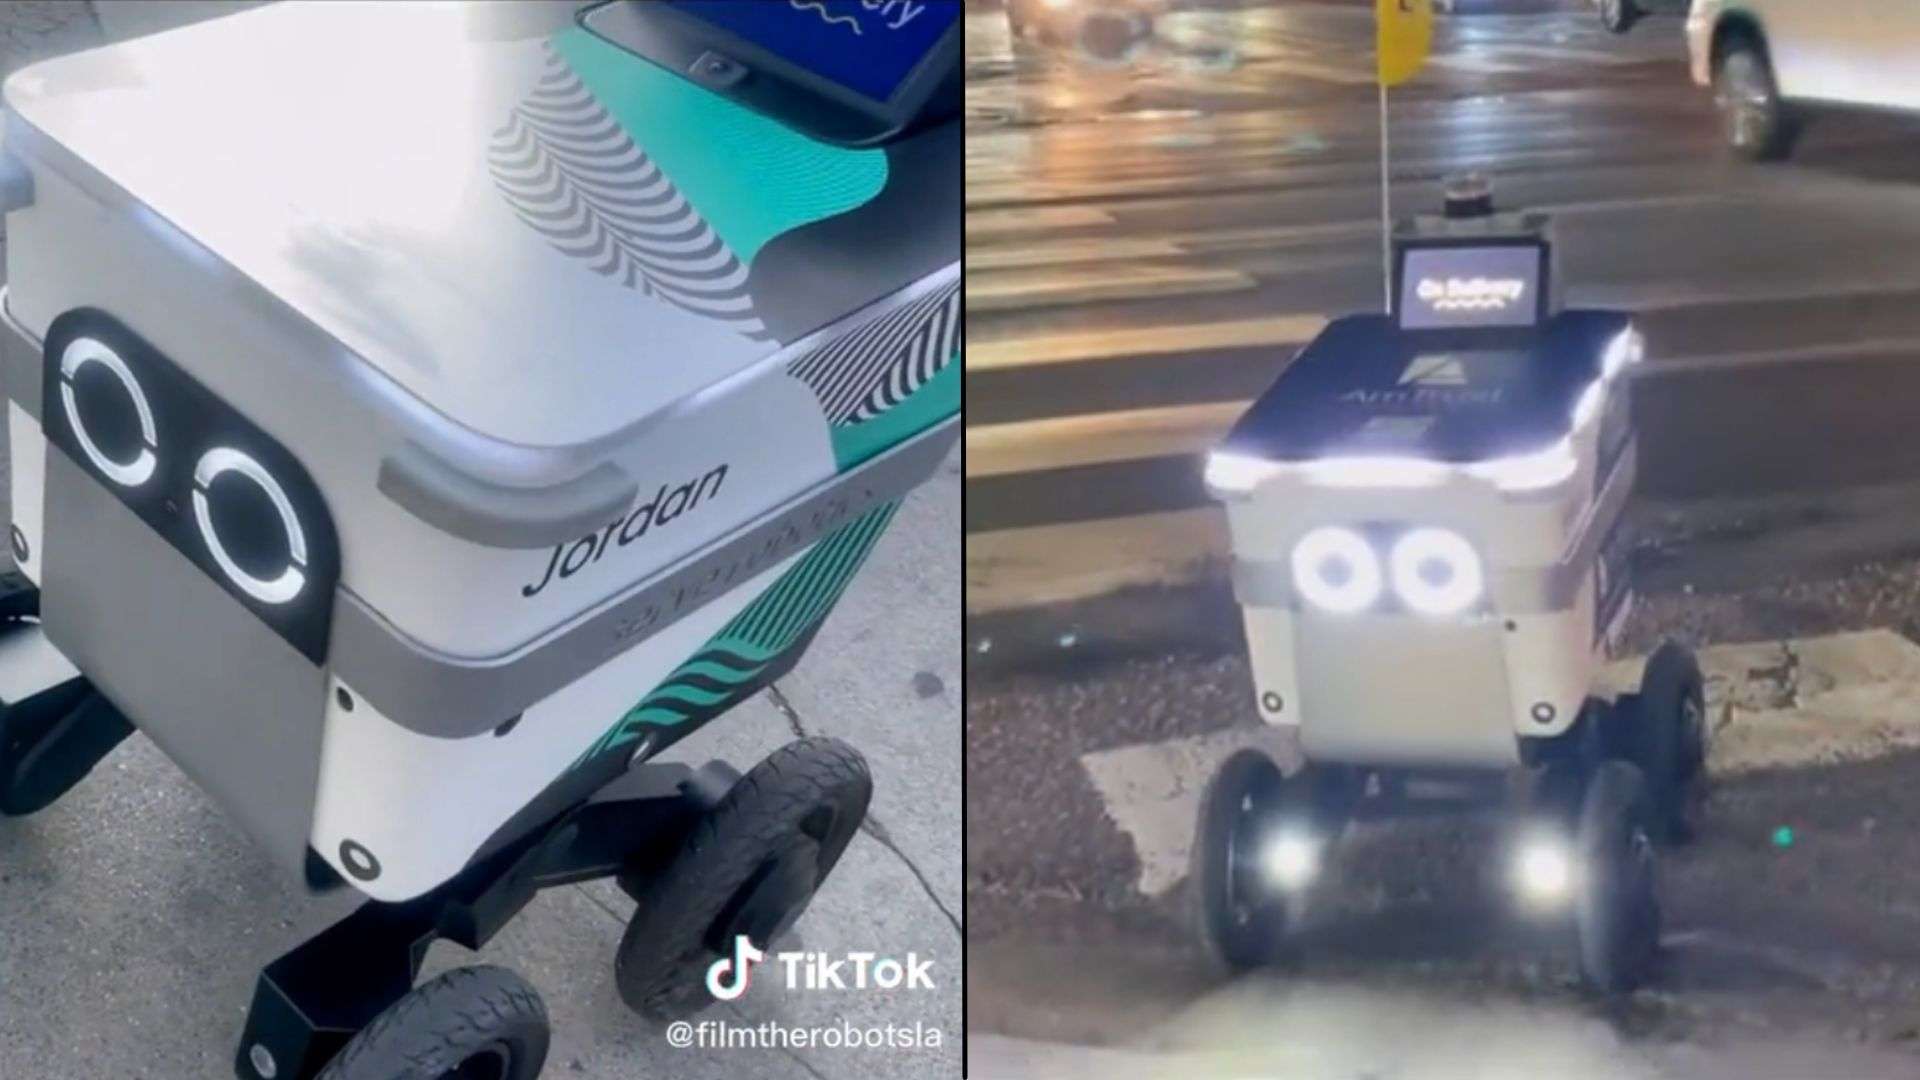 Uber Eats delivery robots up close and on the road